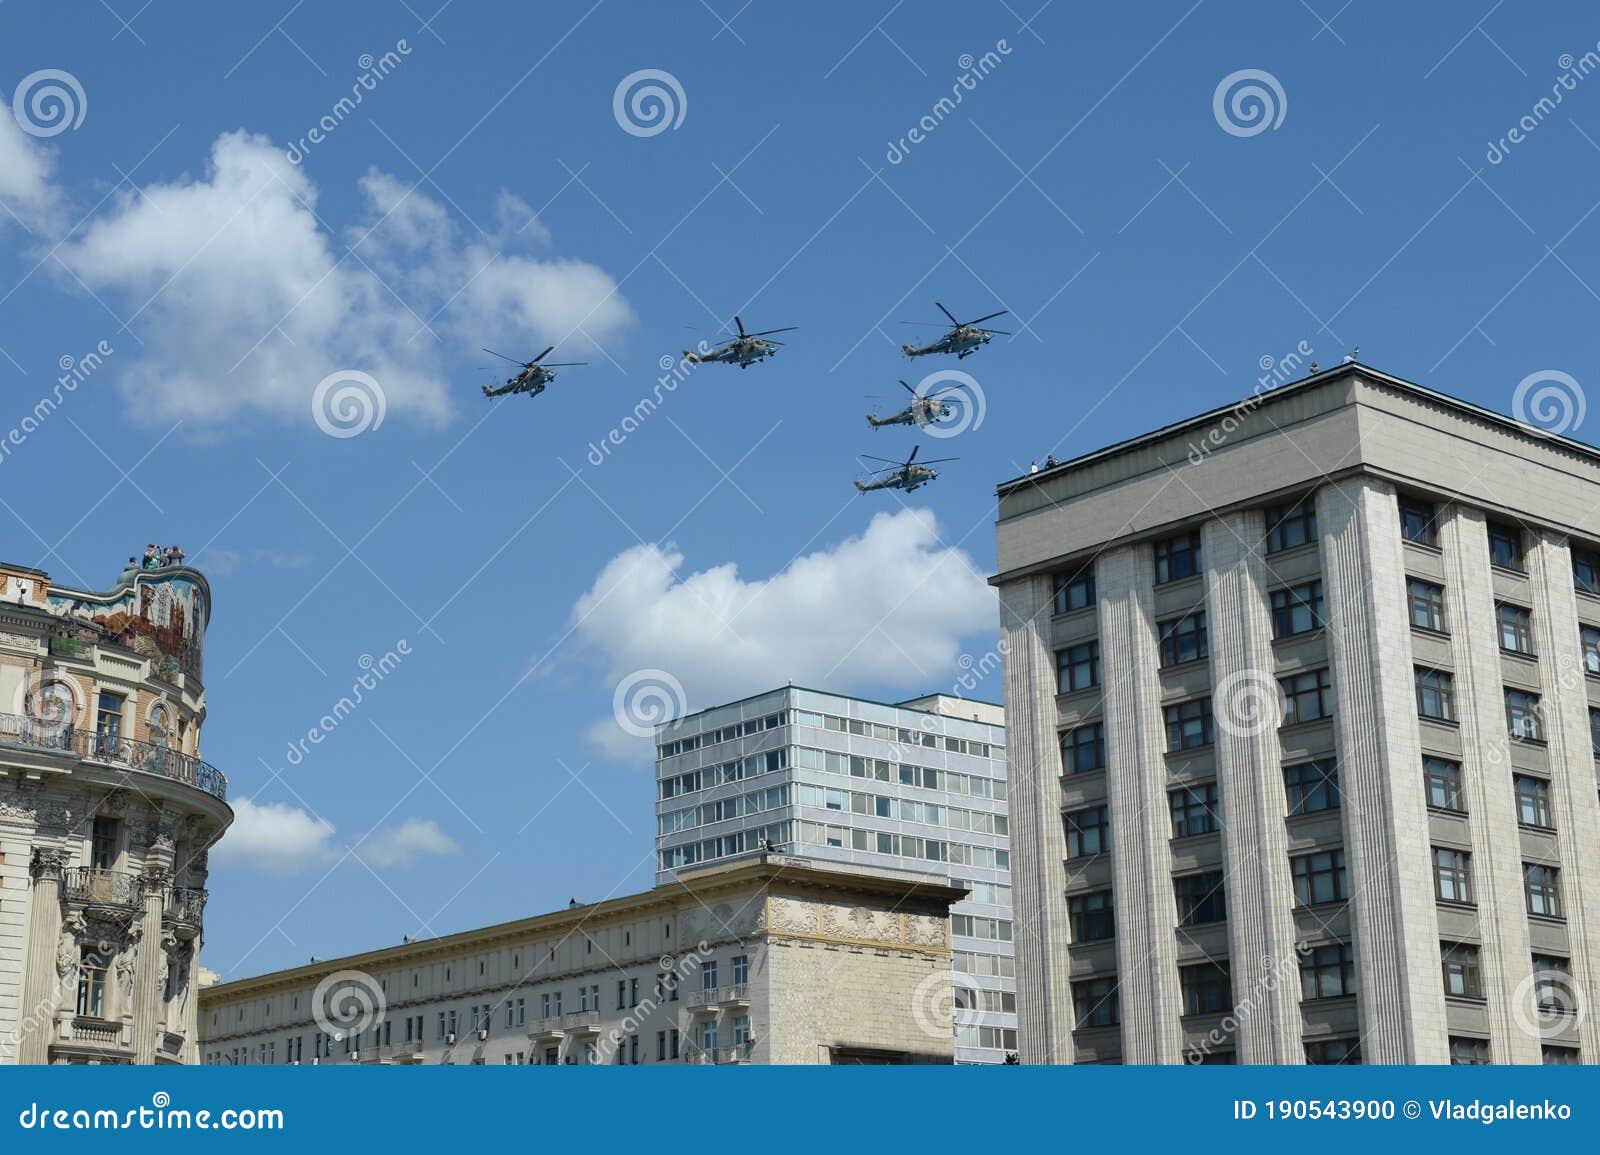 mi-35m attack helicopters in the sky over moscow during the parade dedicated to the 75th anniversary of victory in the great patri